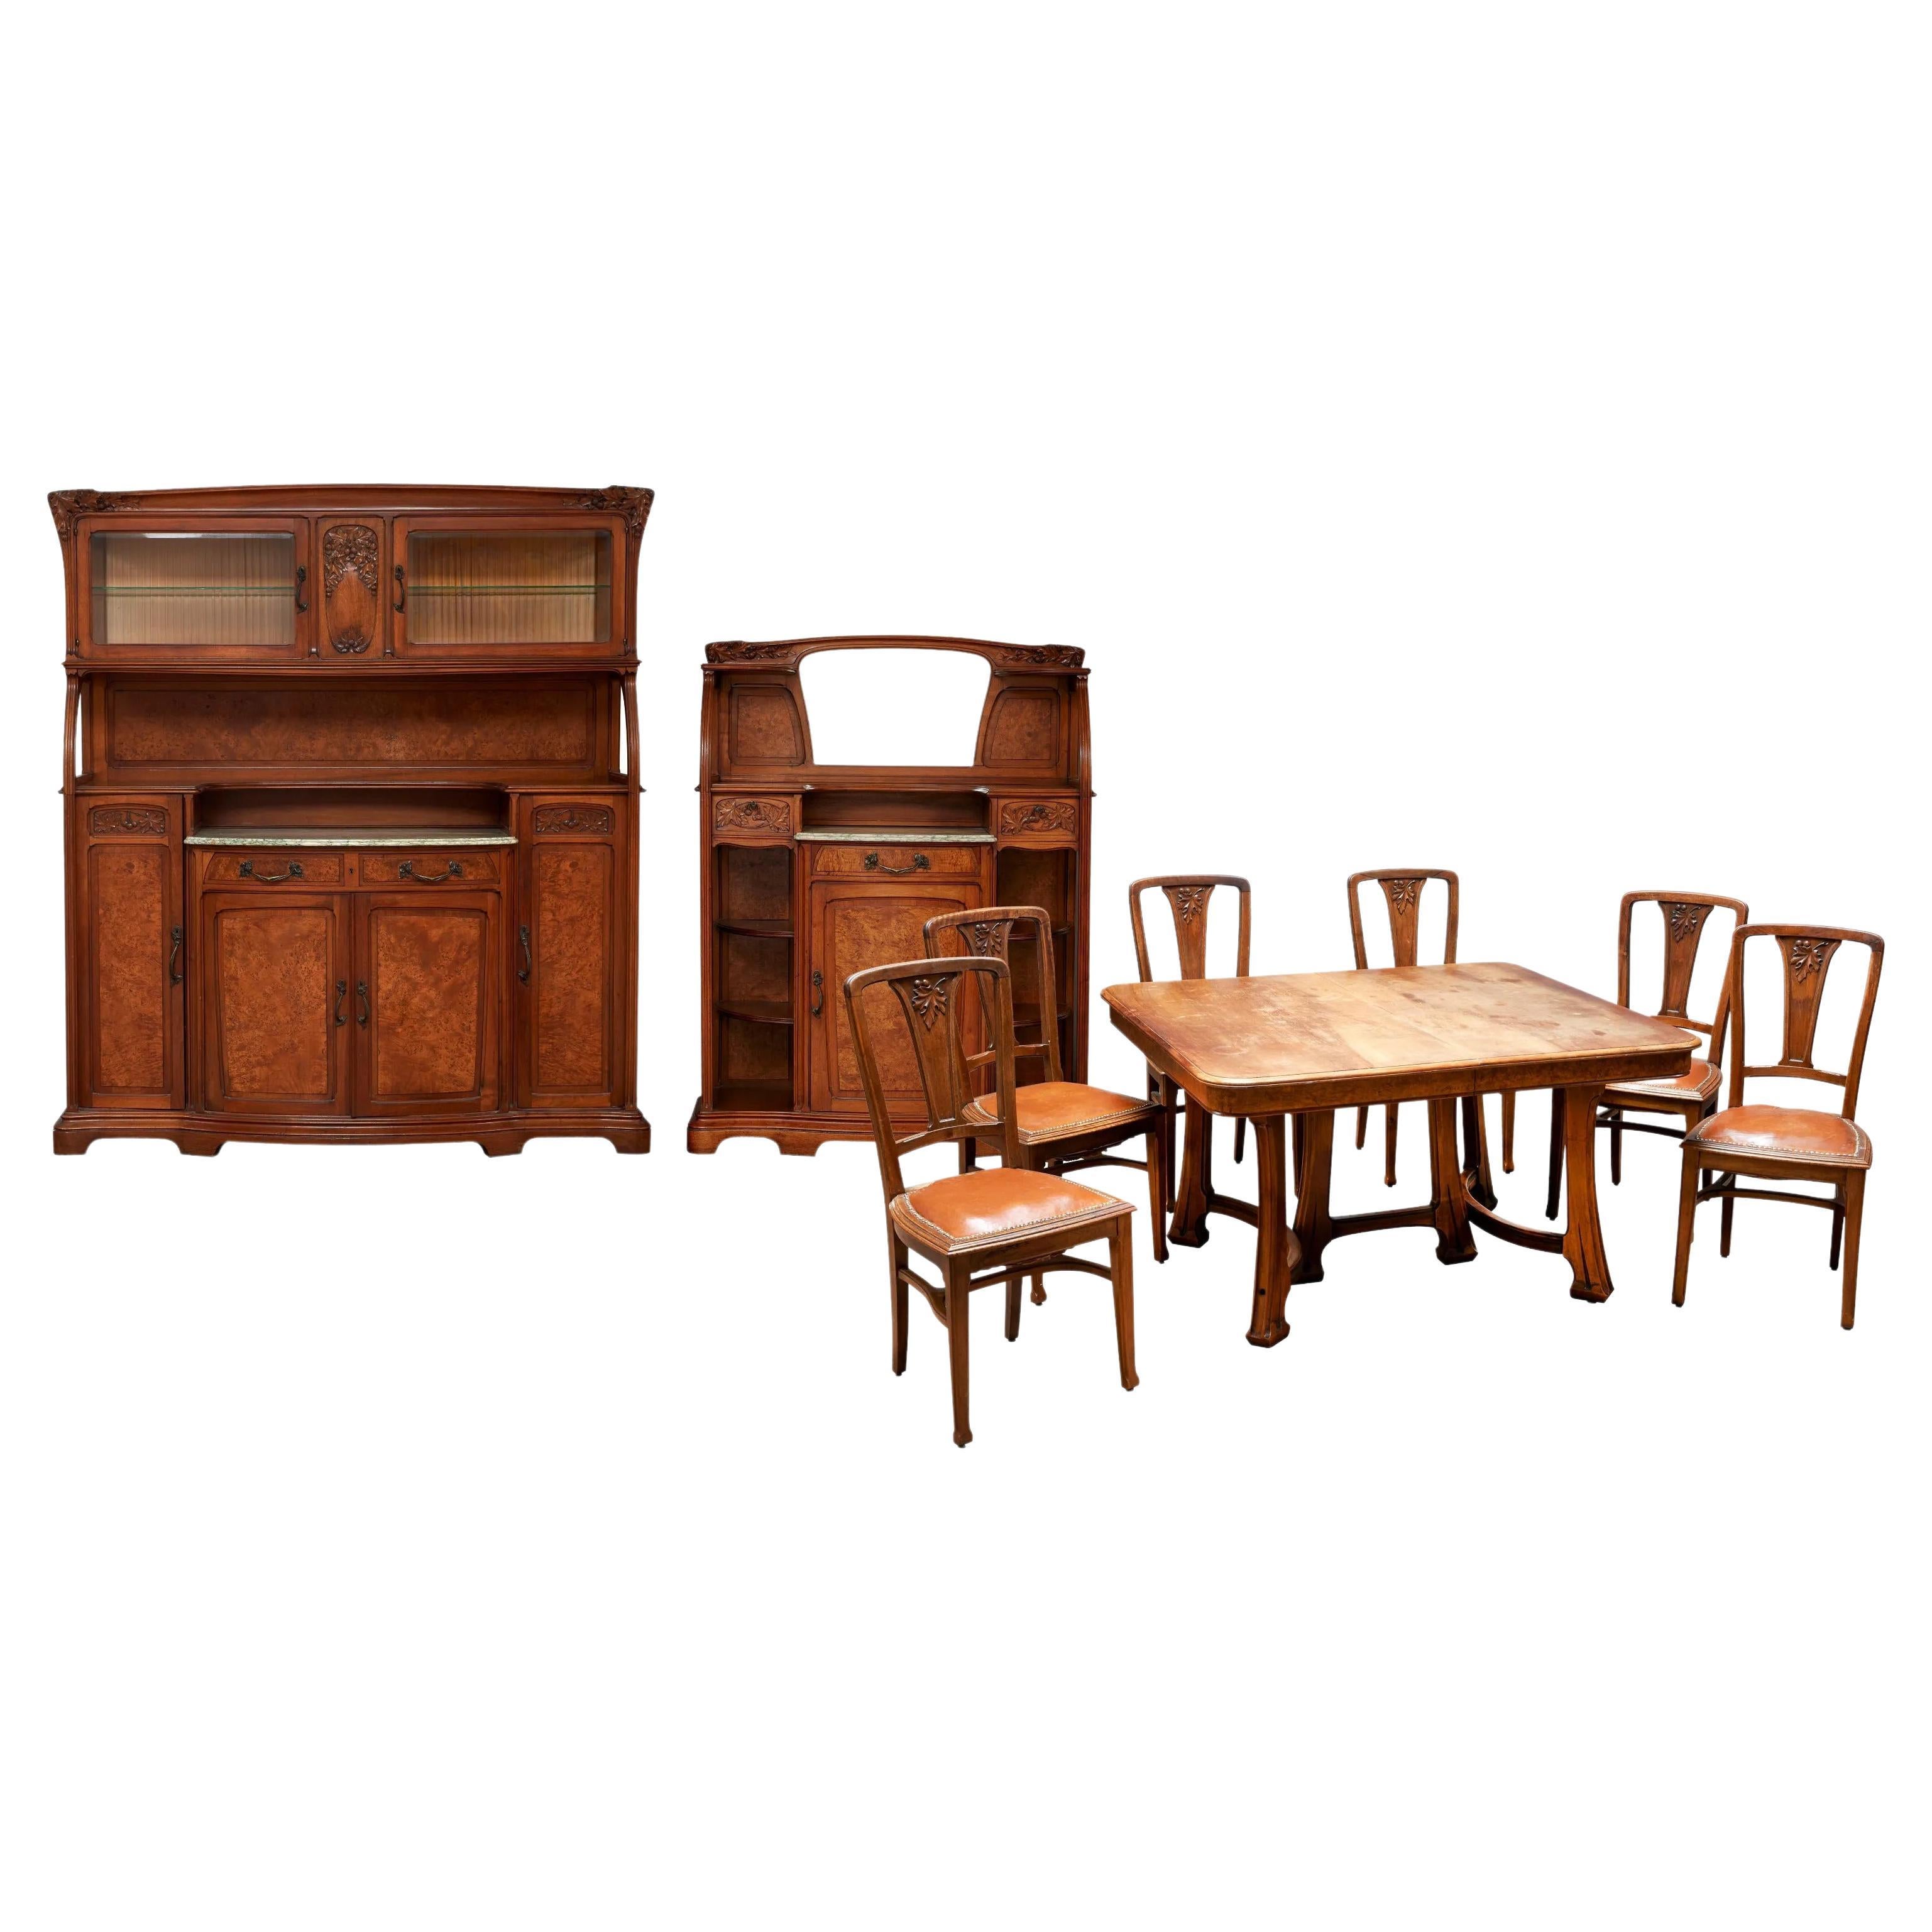  Gauthier-Poinsignon & Cie, Art Nouveau Dining Room Furniture in Walnut and Elm For Sale